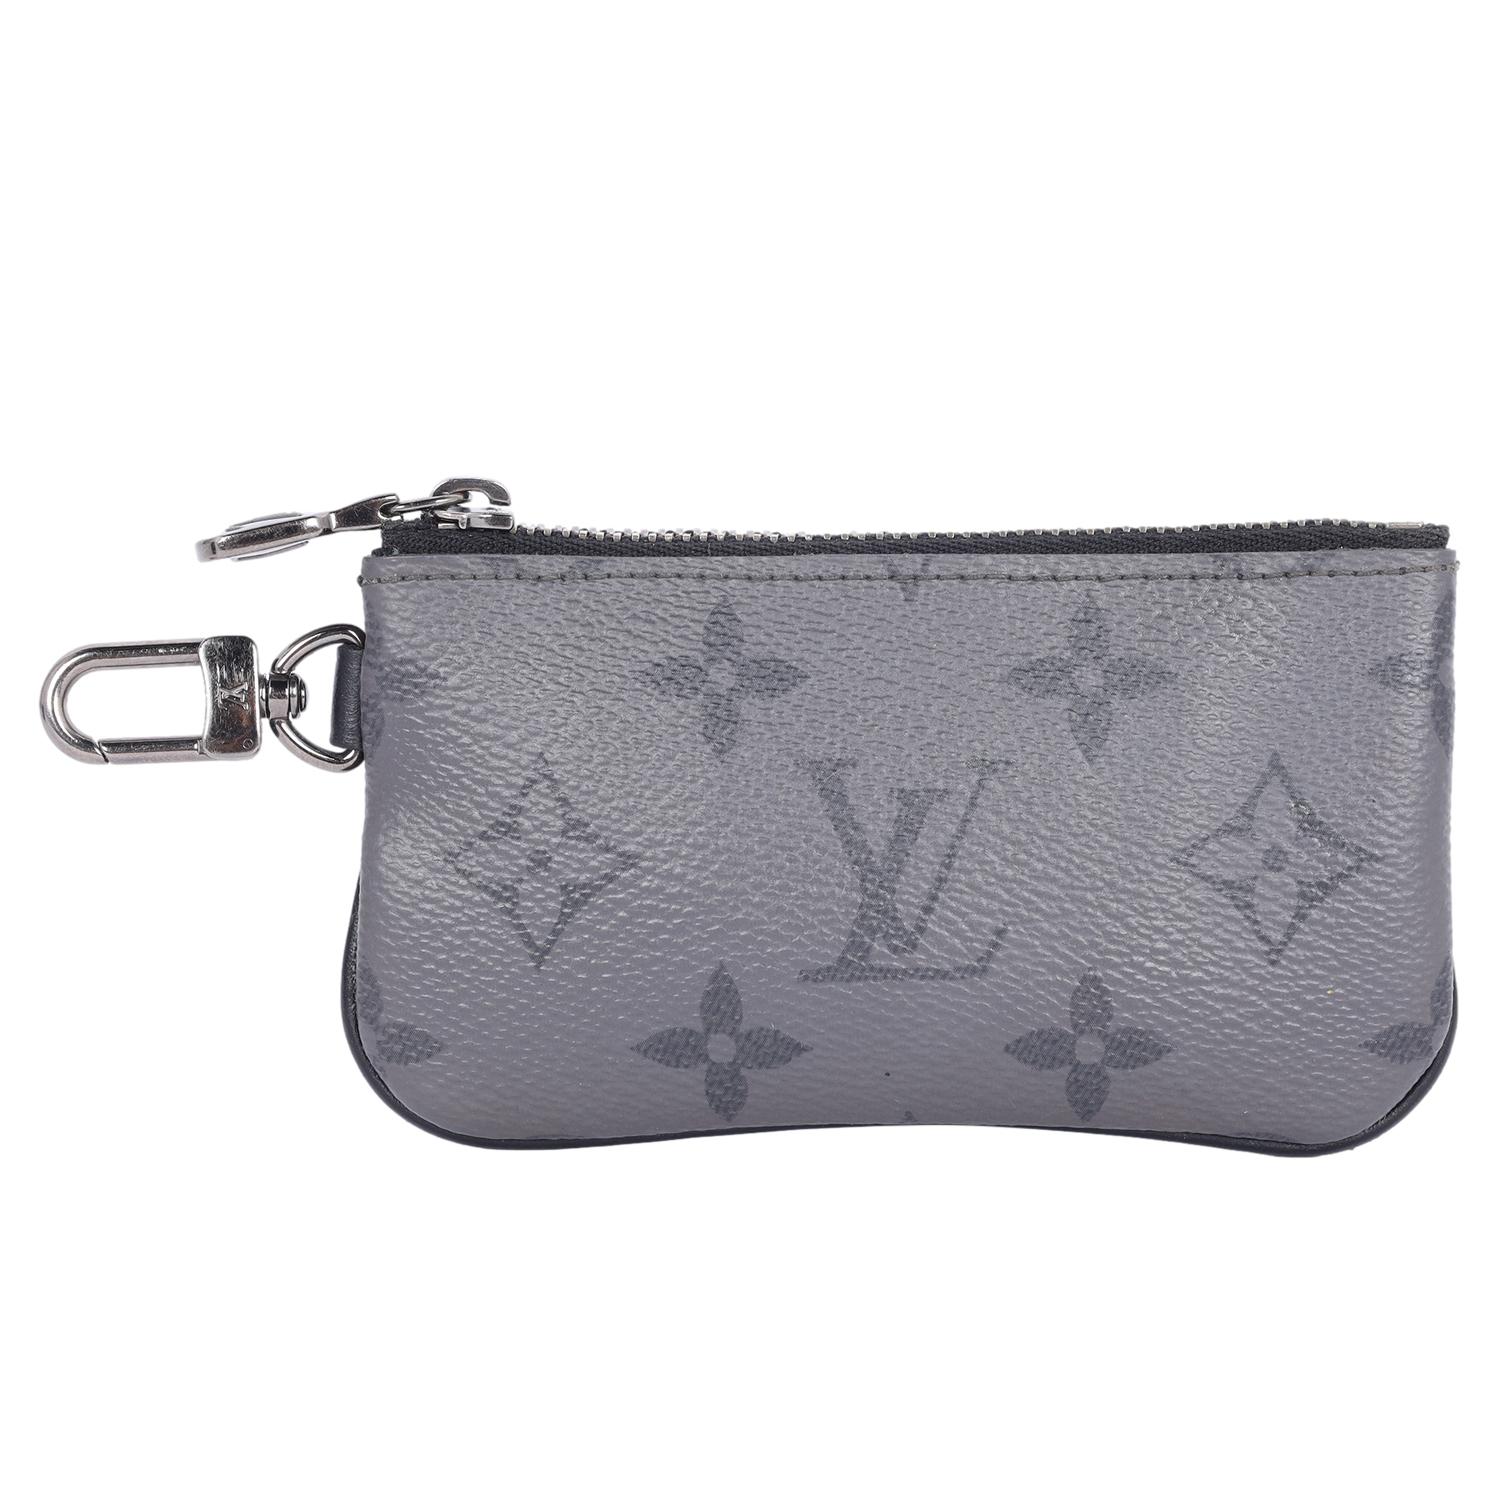 Authentic, pre-loved Louis Vuitton reverse monogram Eclipse trio messenger key pouch. Features Louis Vuitton monogram toile canvas that is reversible in color, zipper top closure, d-ring clasp to attach to your handbags. The interior is black and is